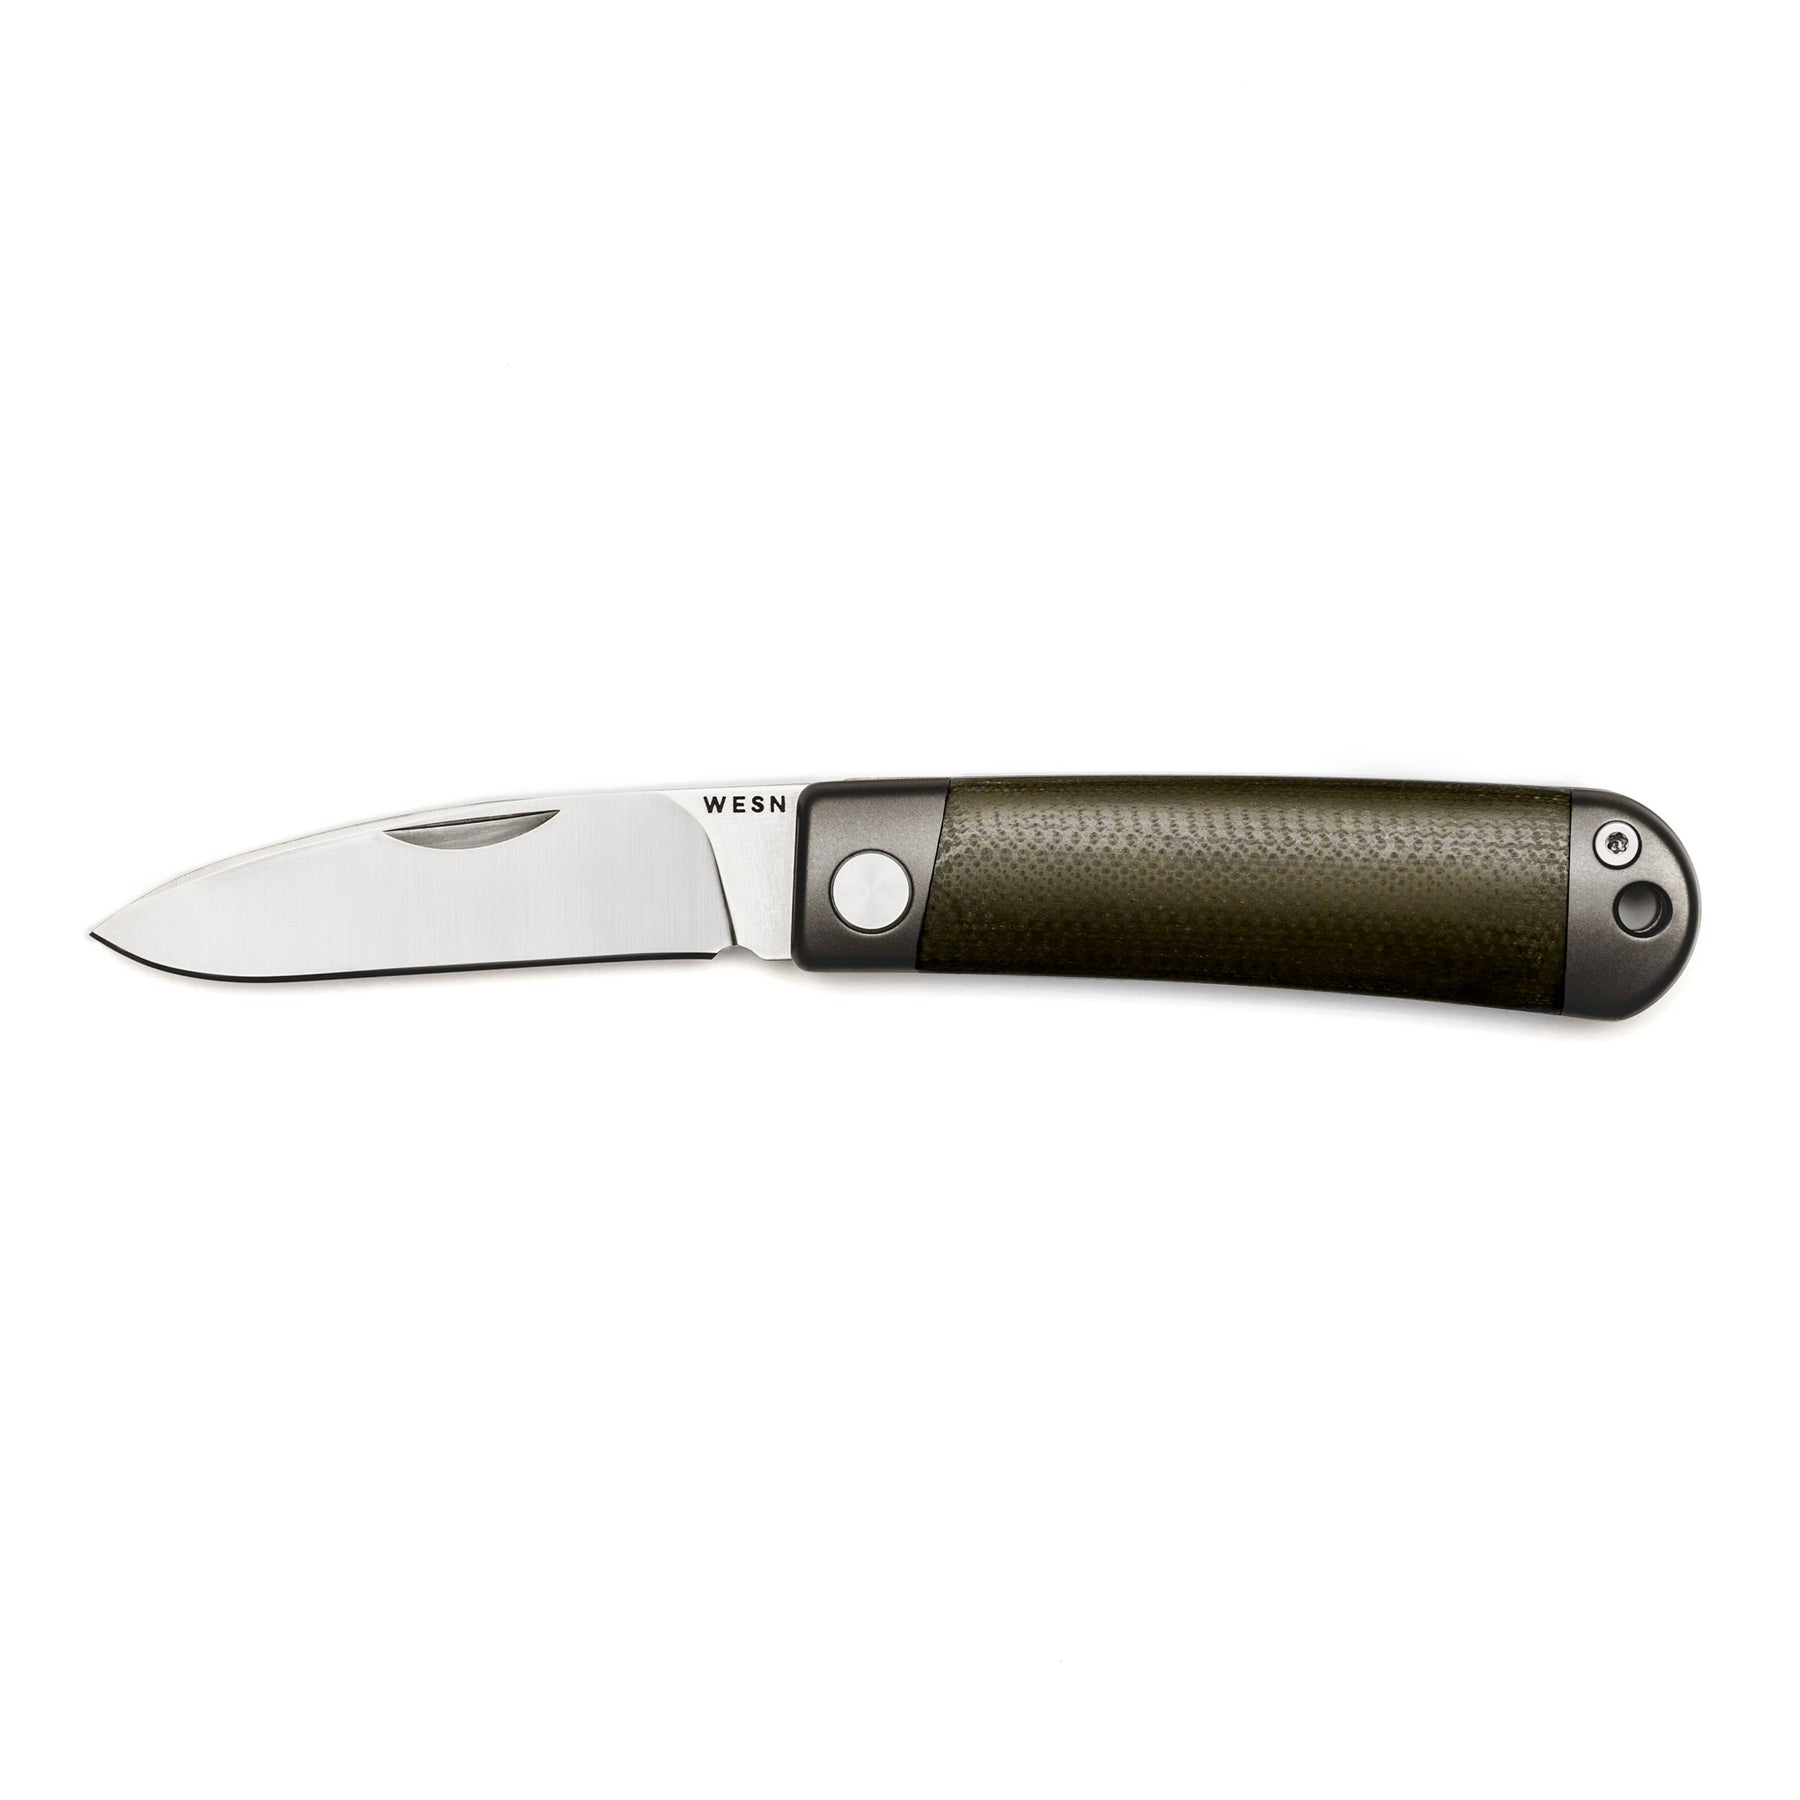 WESN's Allman Pocket Knife Is So Good, I Stopped Carrying Other